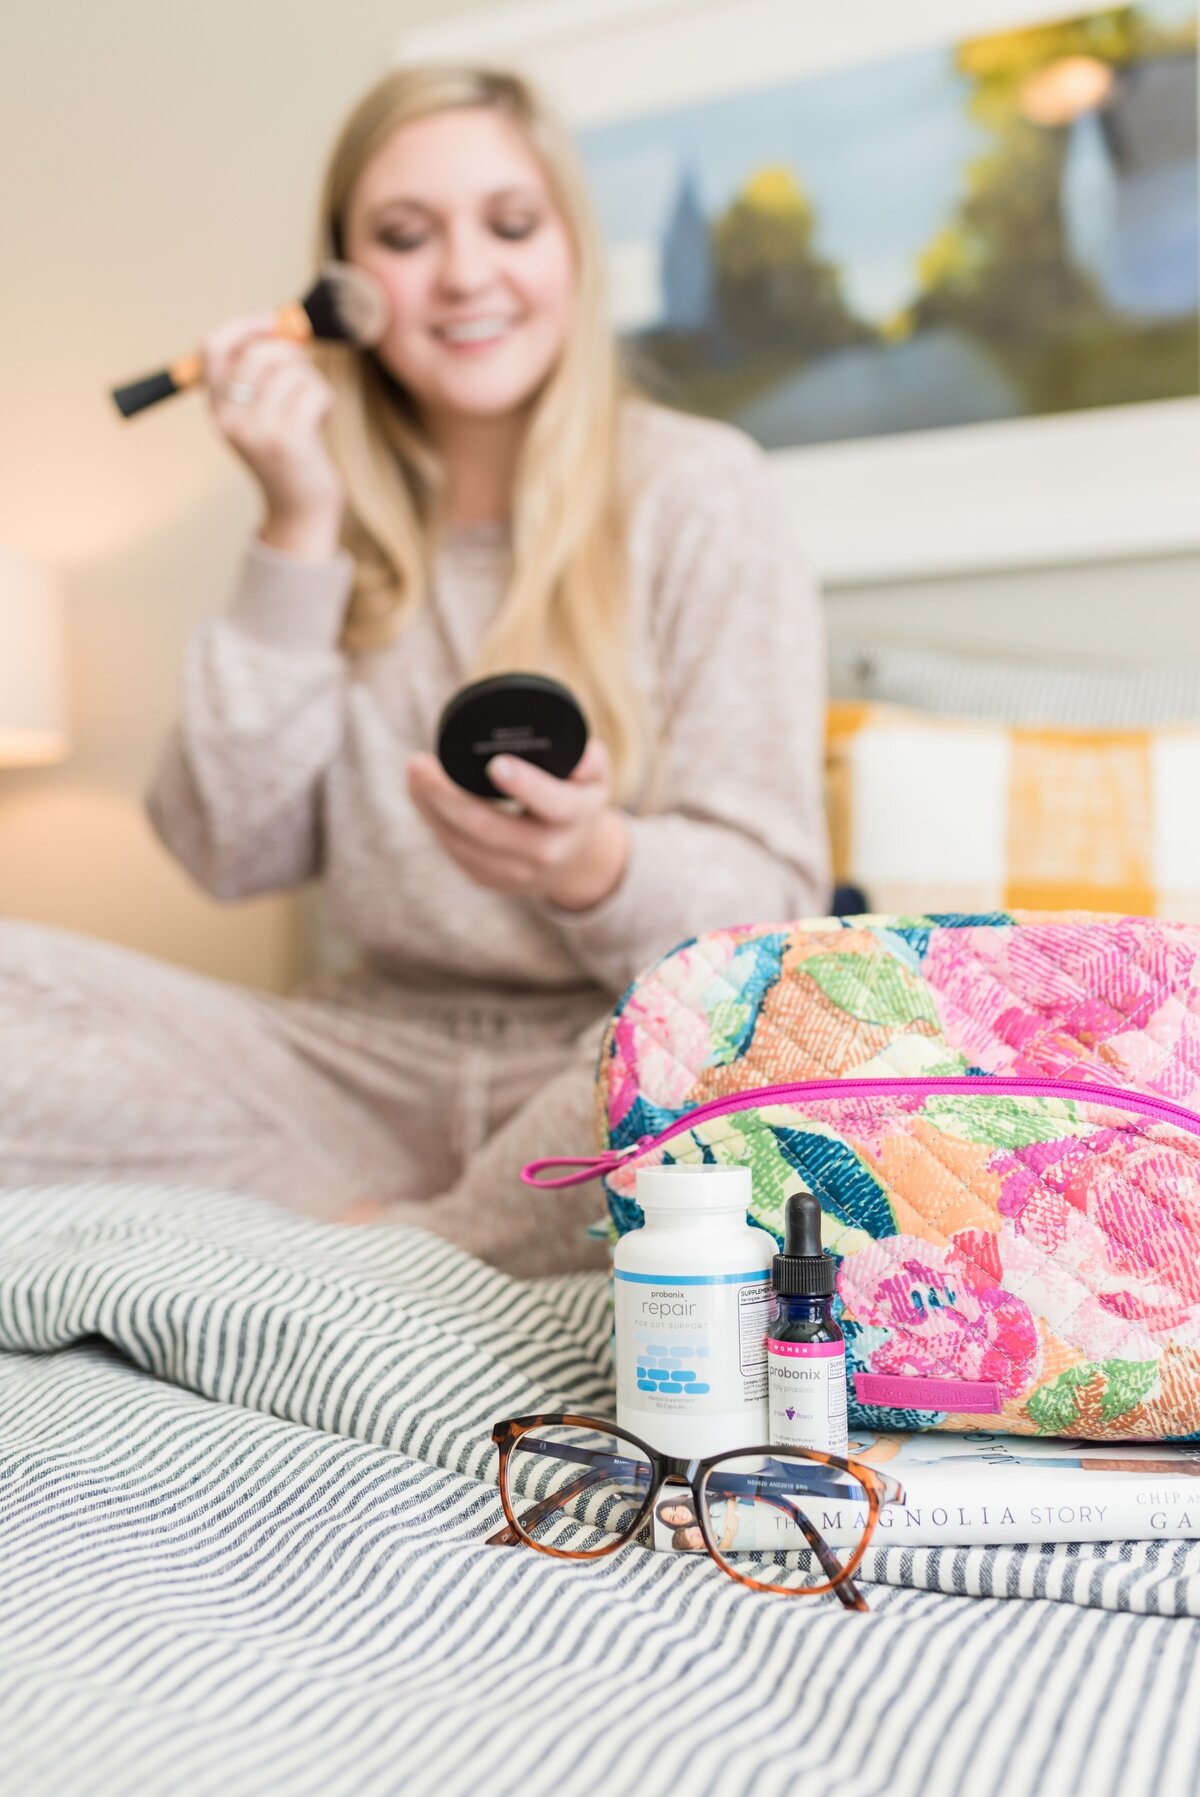 Product photo of Humarian probiotics with a make up bag and glasses and a woman blurry in the background apply makeup